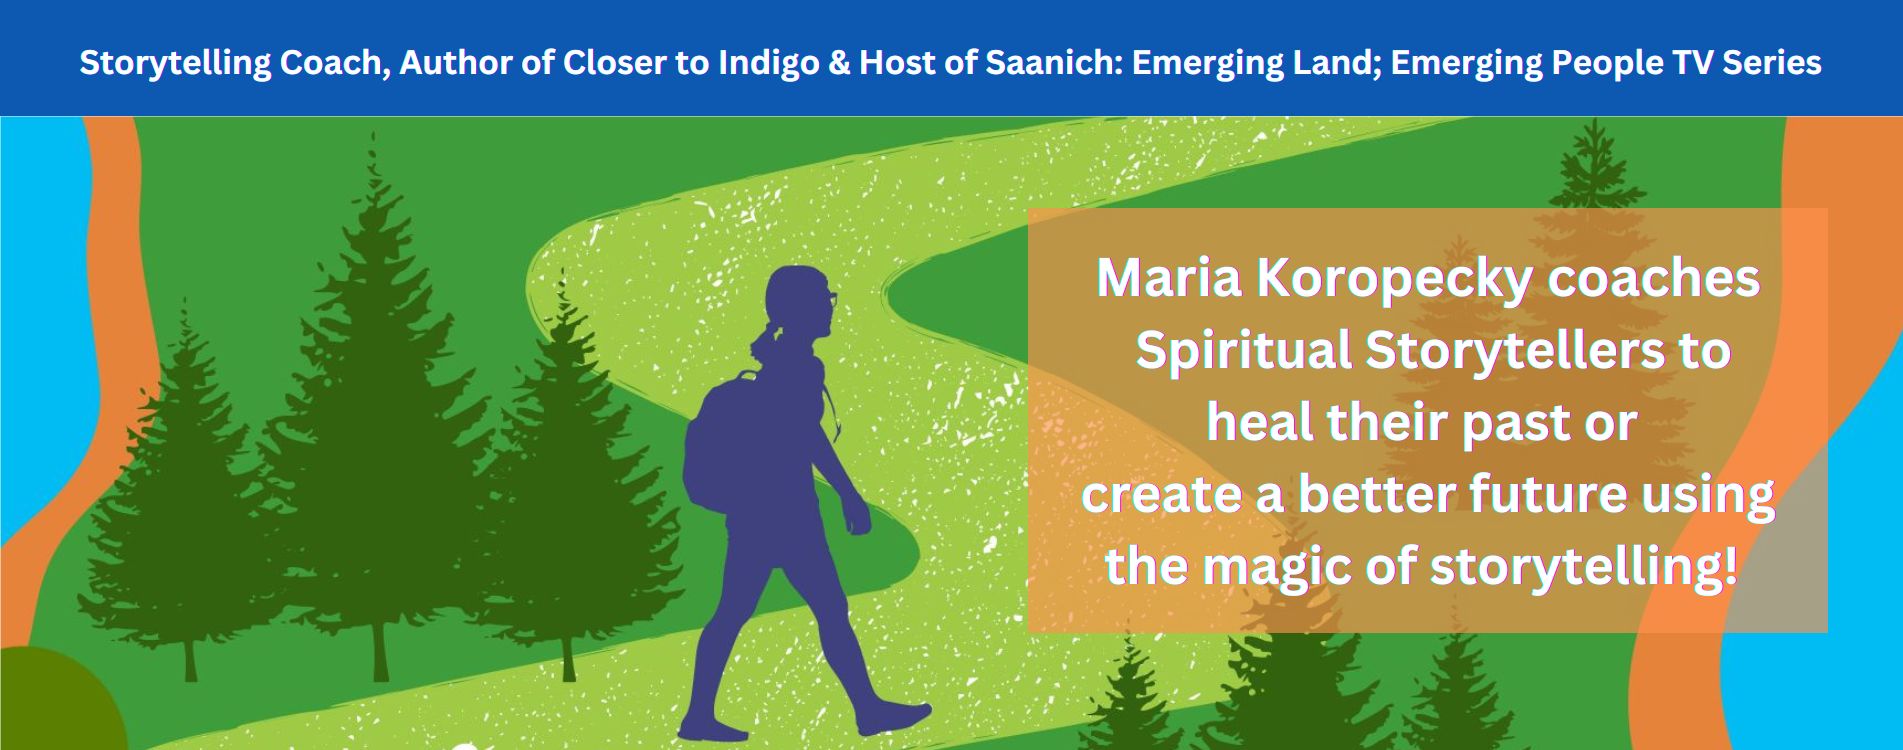 Maria Koropecky coaches Spiritual Storytellers to heal their past or create a better future using the magic of storytelling.